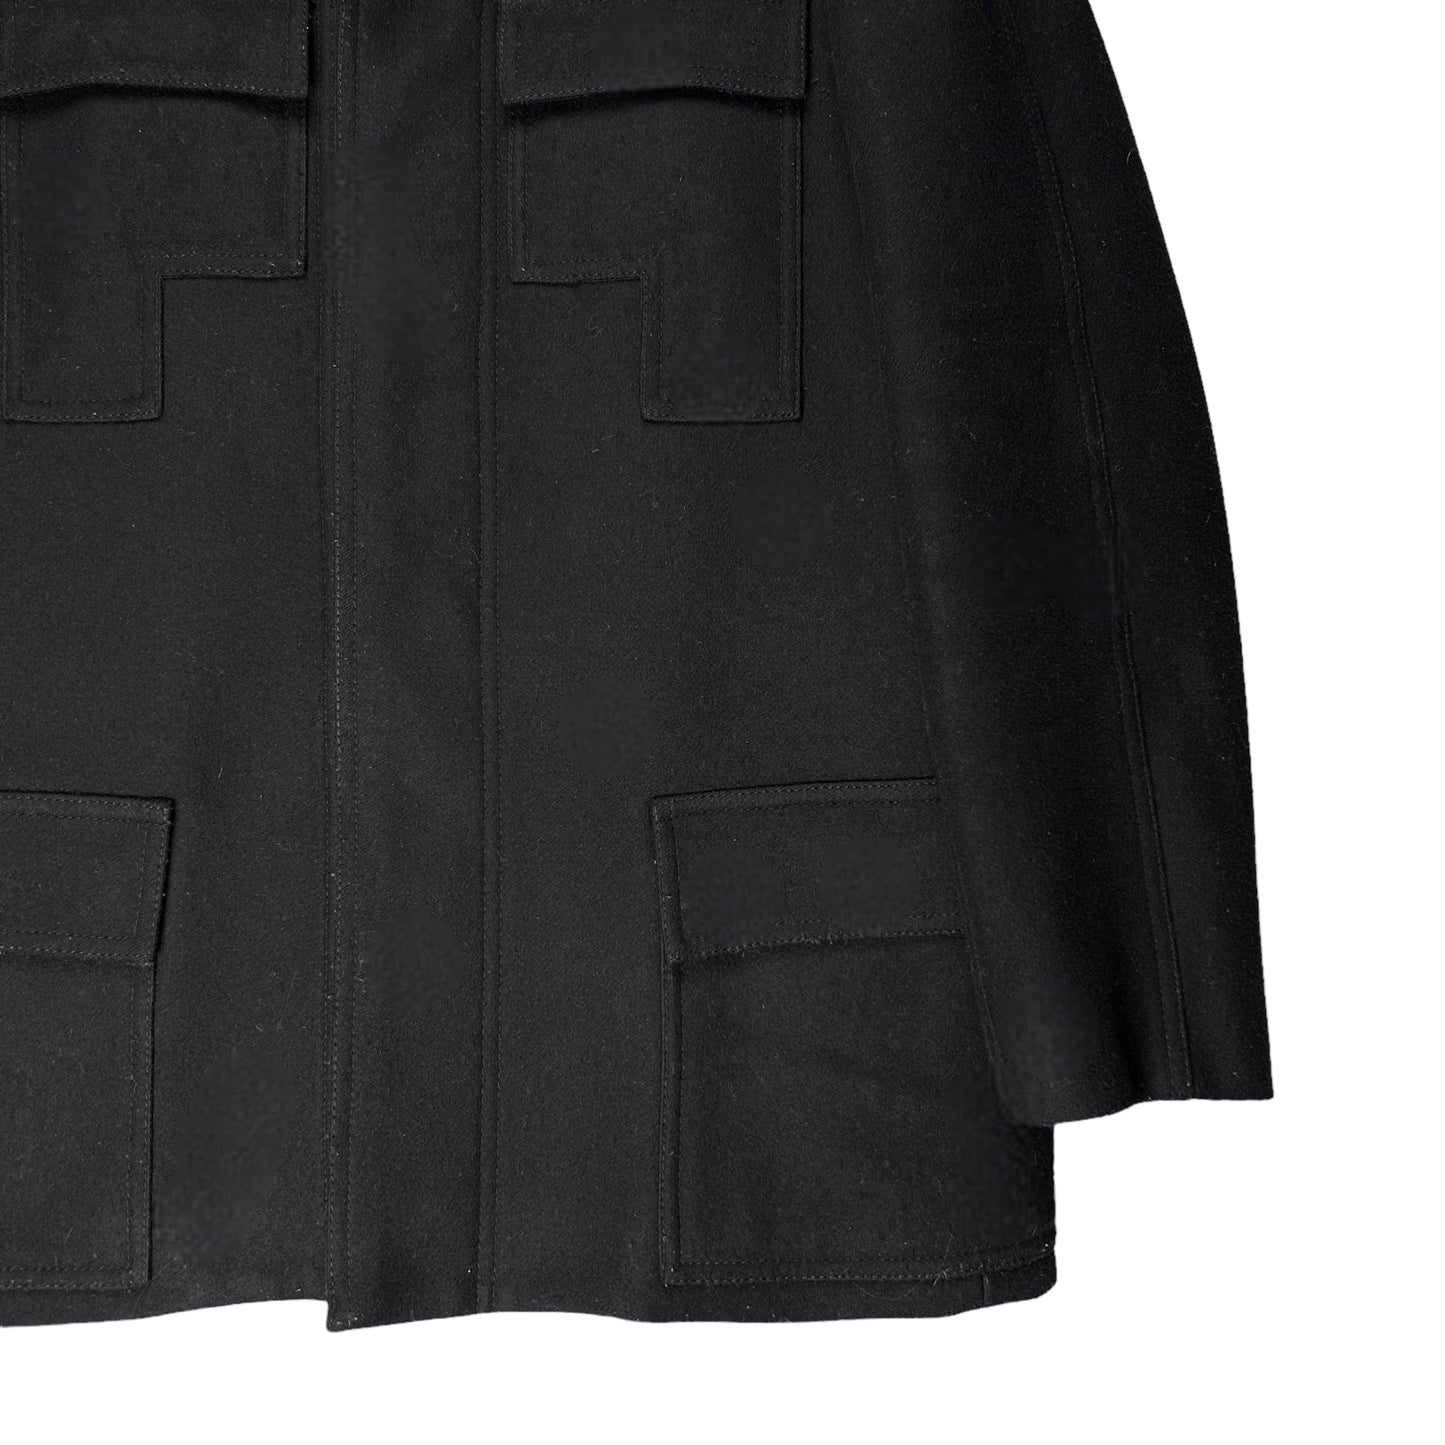 Dior Homme Officer Wool Jacket - AW07